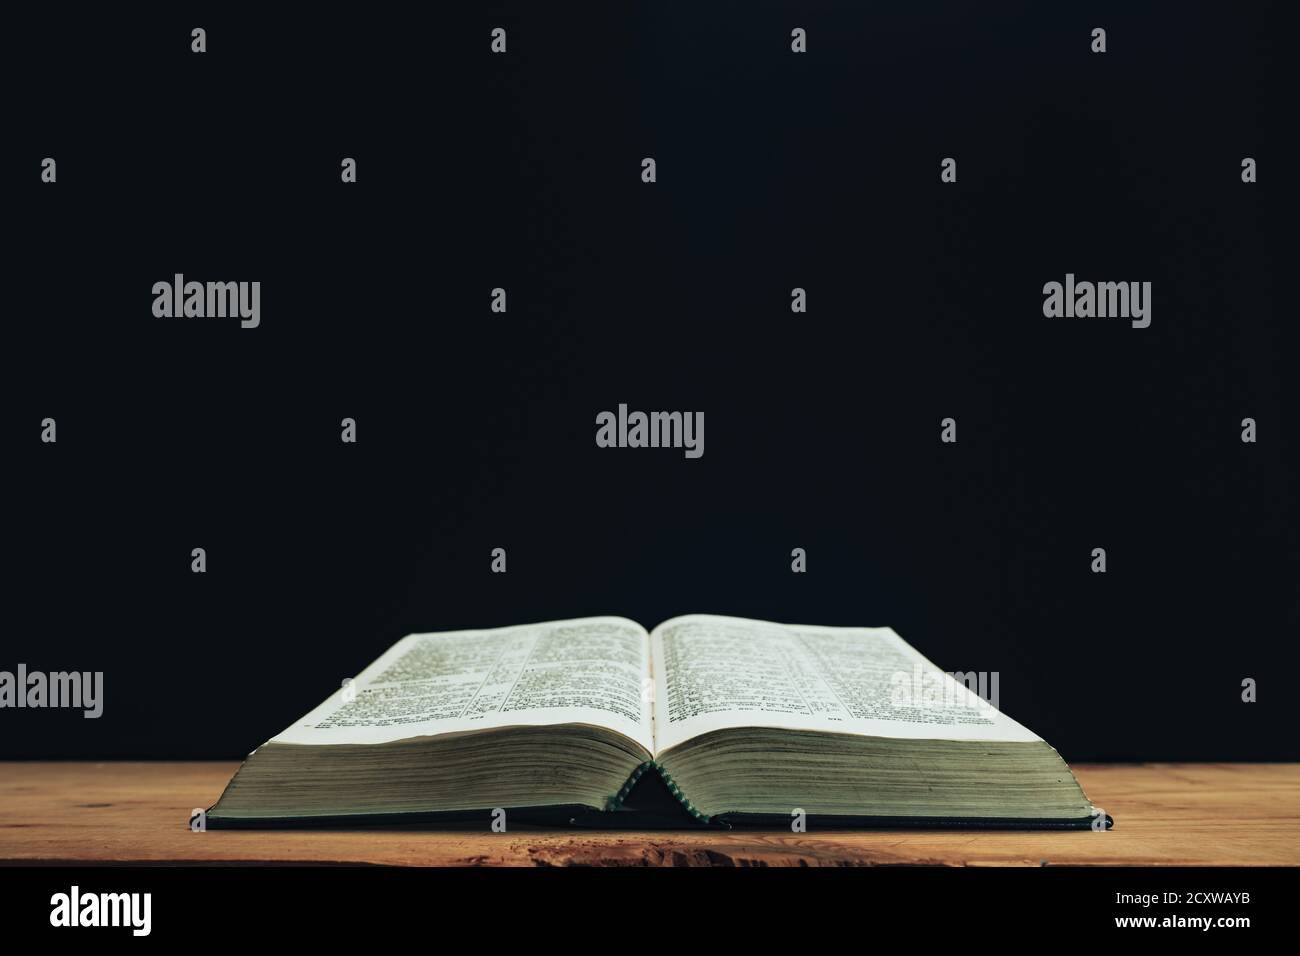 Open Holy Bible on a red old wooden table. Beautiful Black wall background. Stock Photo